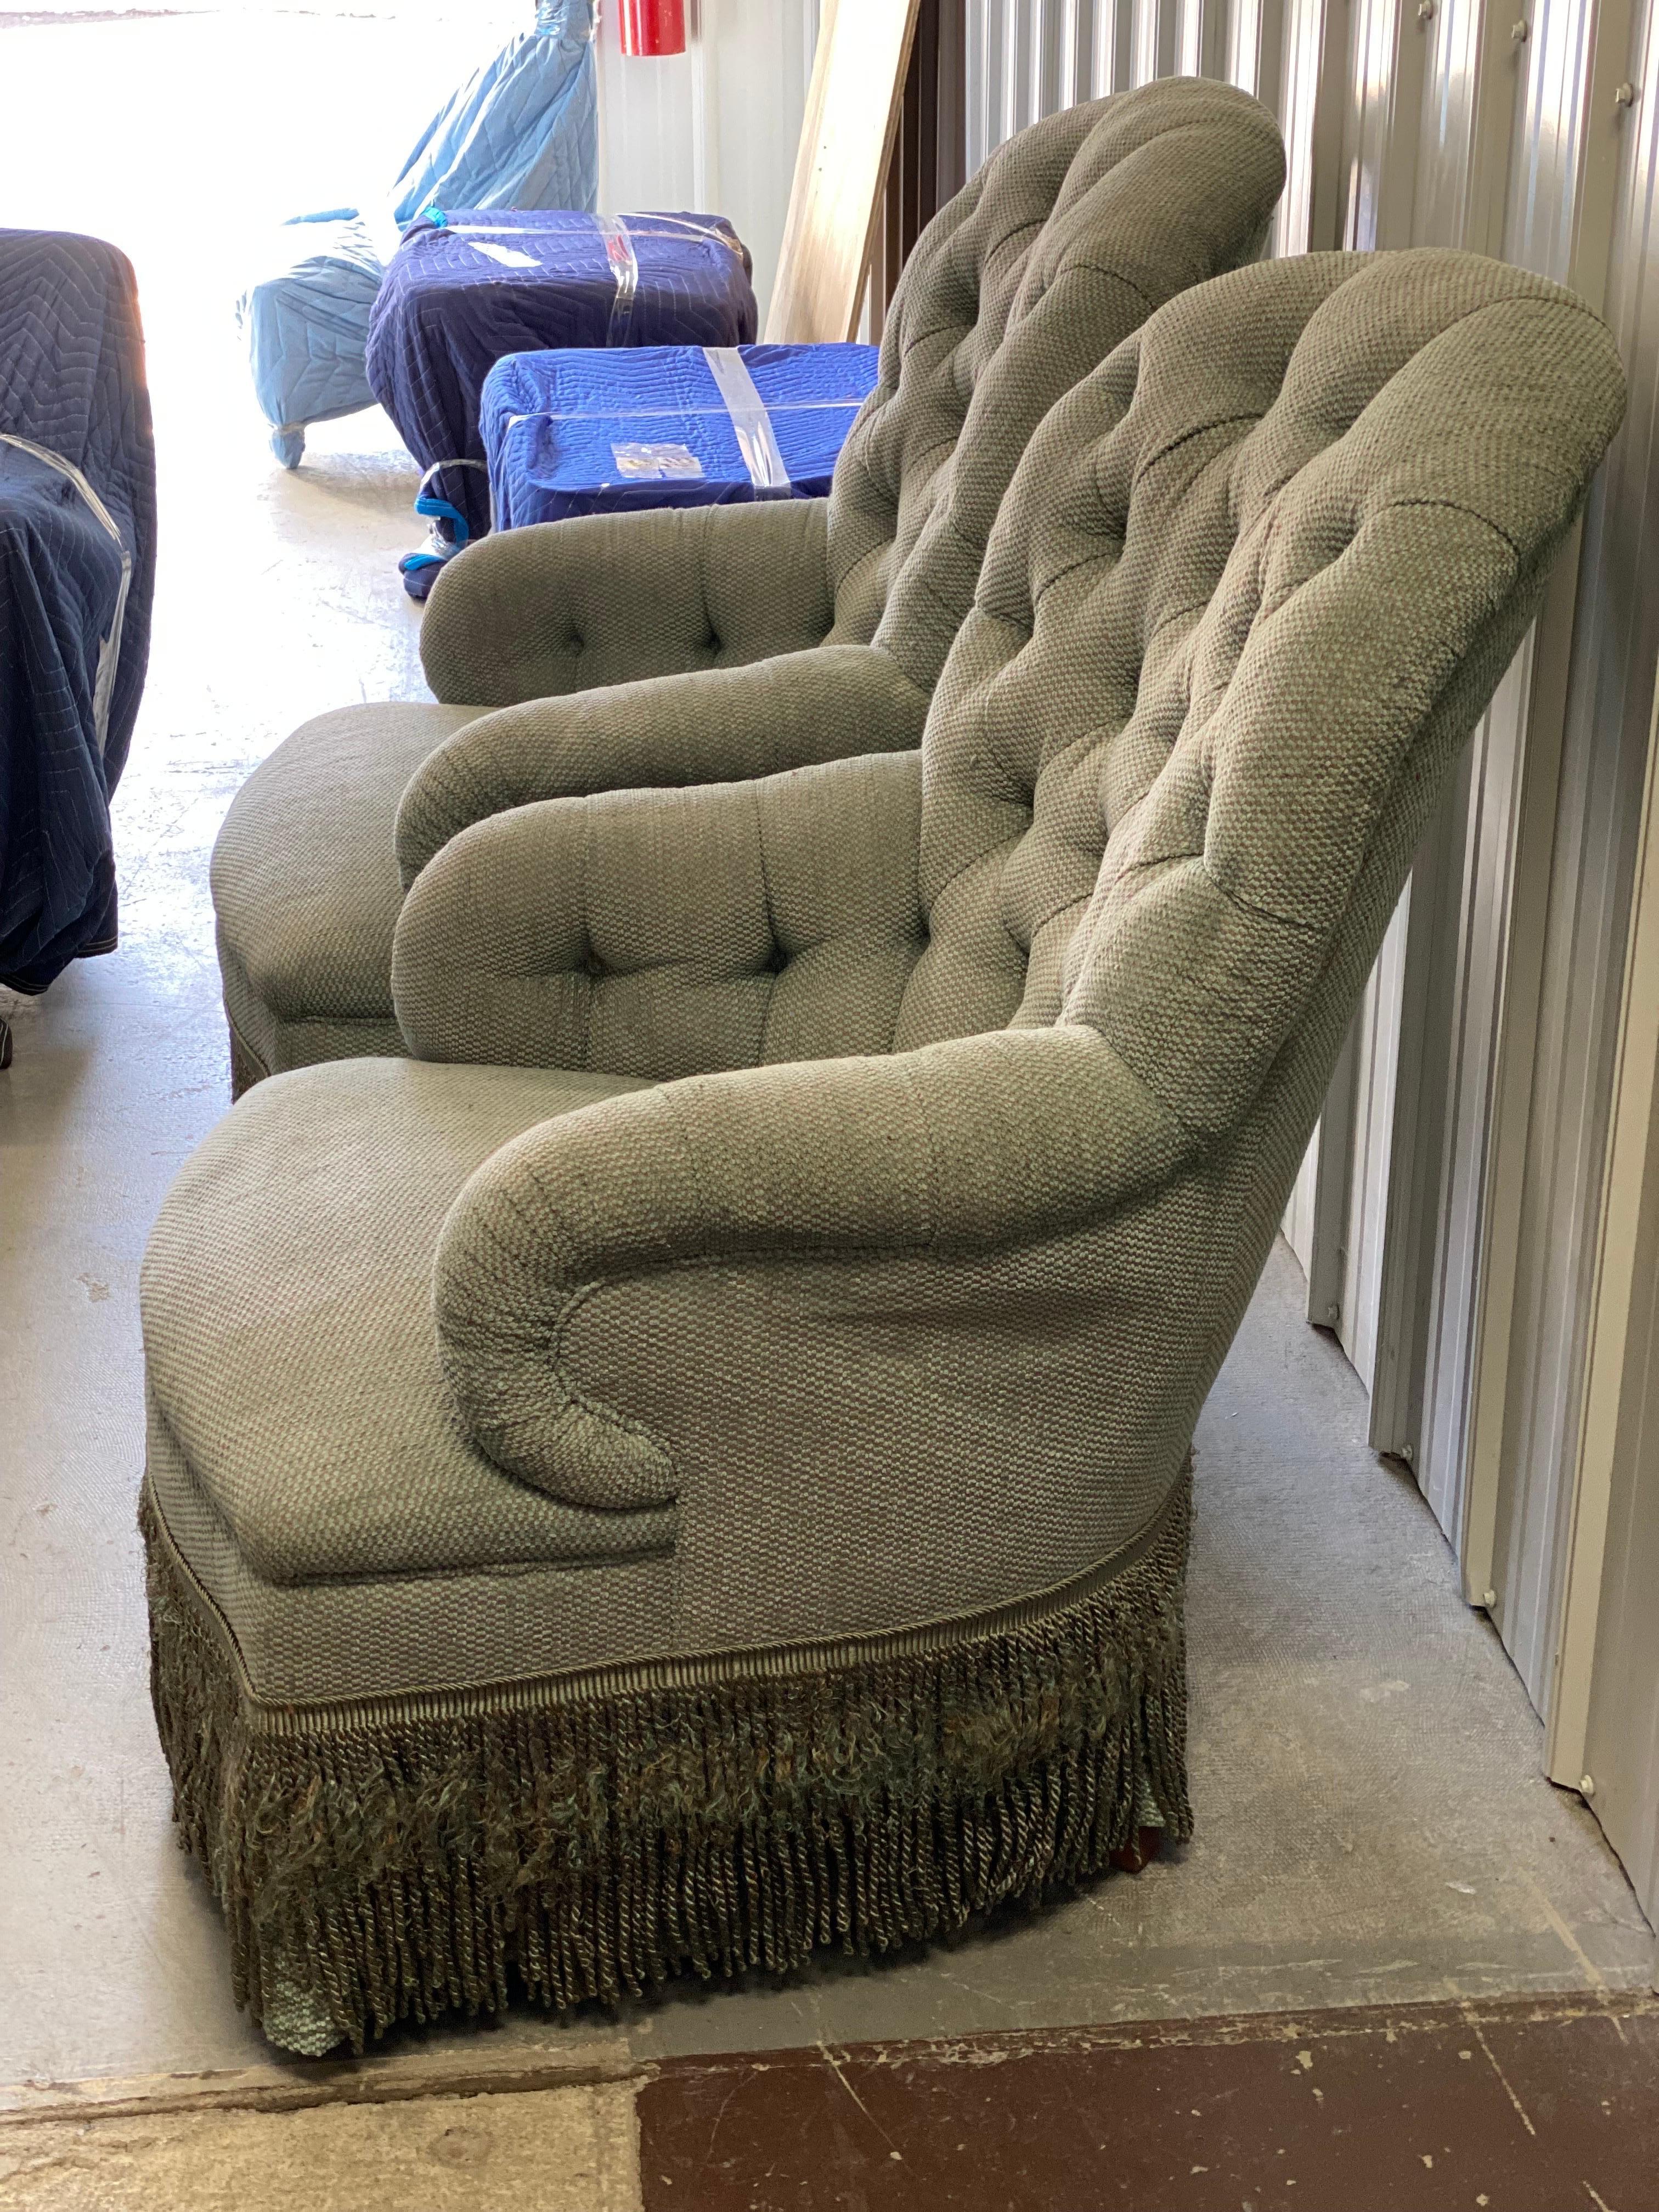 Pair of Tufted Rounded Back Armchairs Custom-Made by David Easton.
Tufted, rounded back and arms, tight seat with long bullion fringe. Classic form. Chenille and bullion fringe in poor condition. Structurally sound, reupholstery needed. Cat pulls to